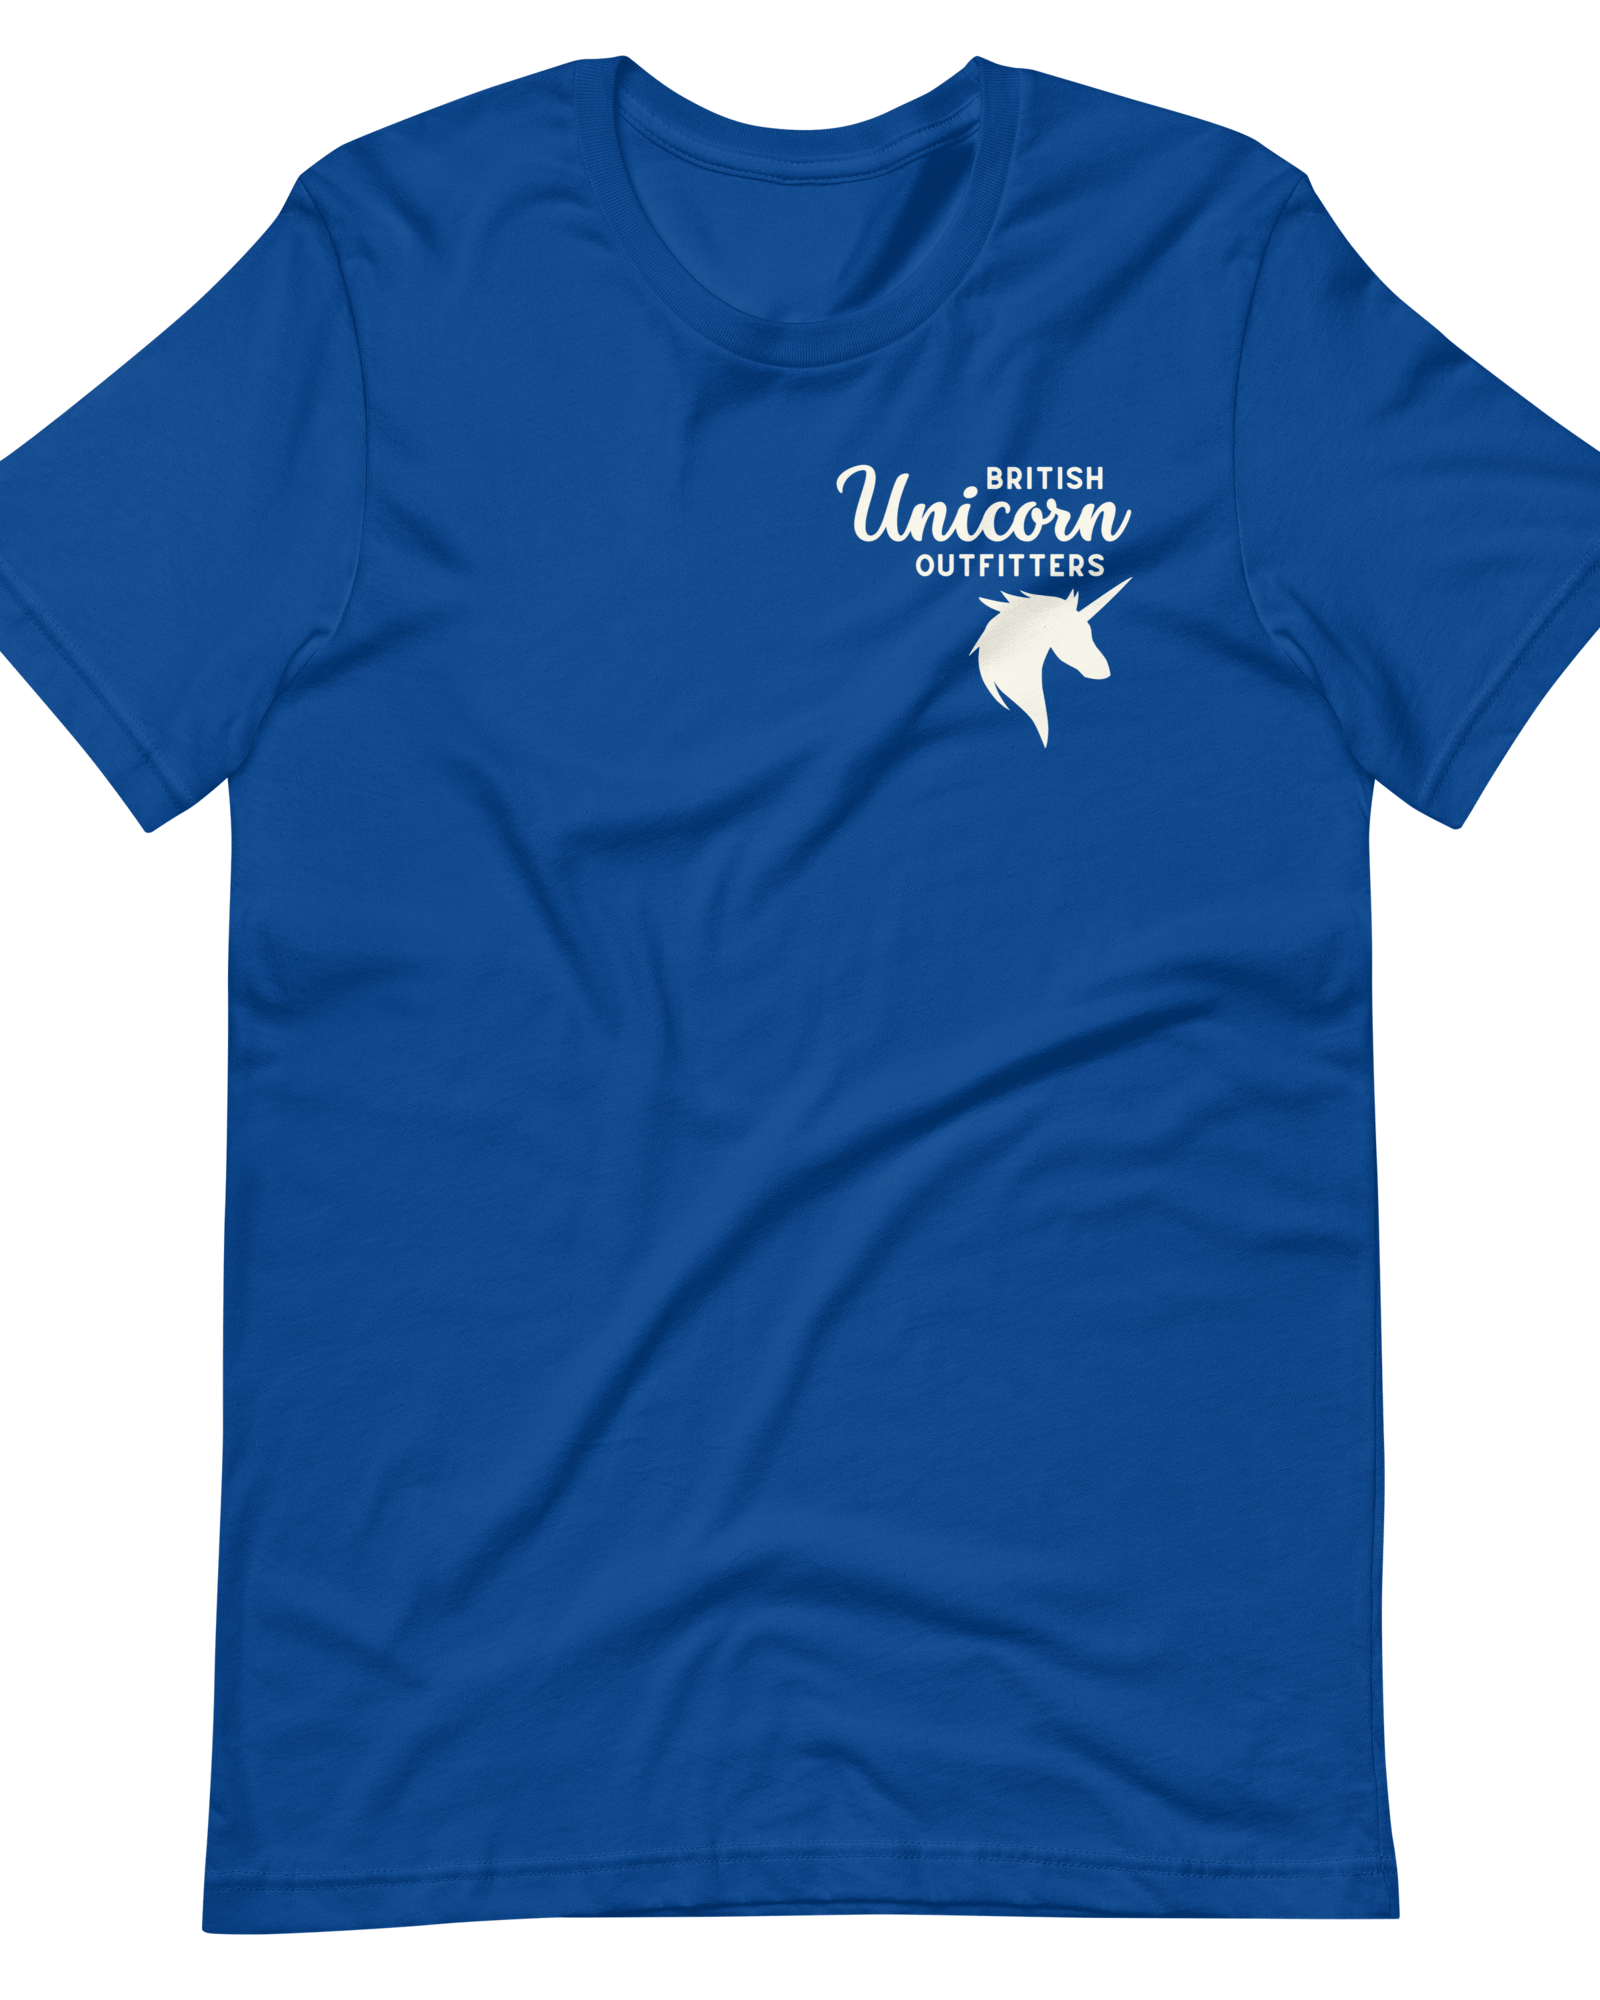 British Unicorn Outfitters T-shirt | Left Chest True Royal / S Shirts & Tops Jolly & Goode